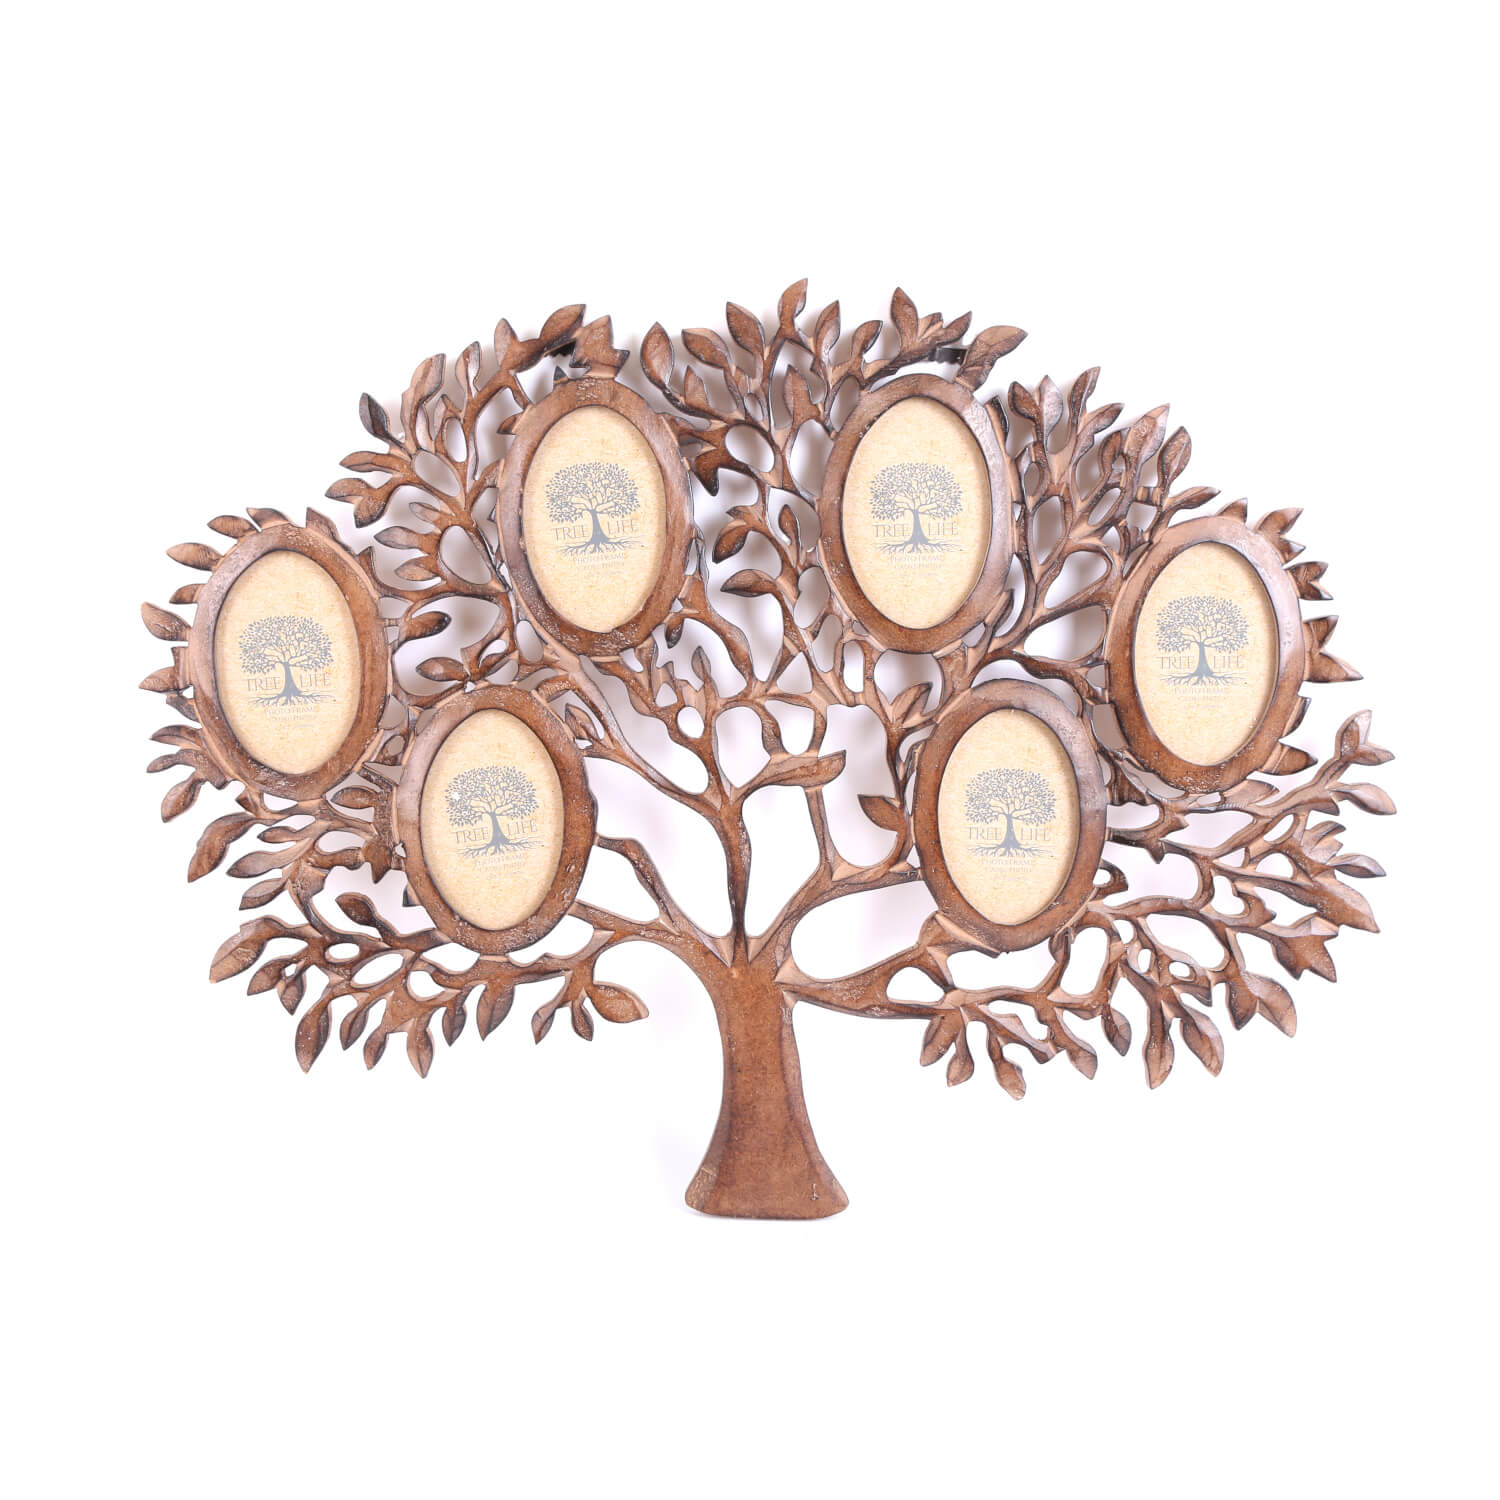 The Home Tree Of Life 6 Frames - 60cm x 45cm 1 Shaws Department Stores